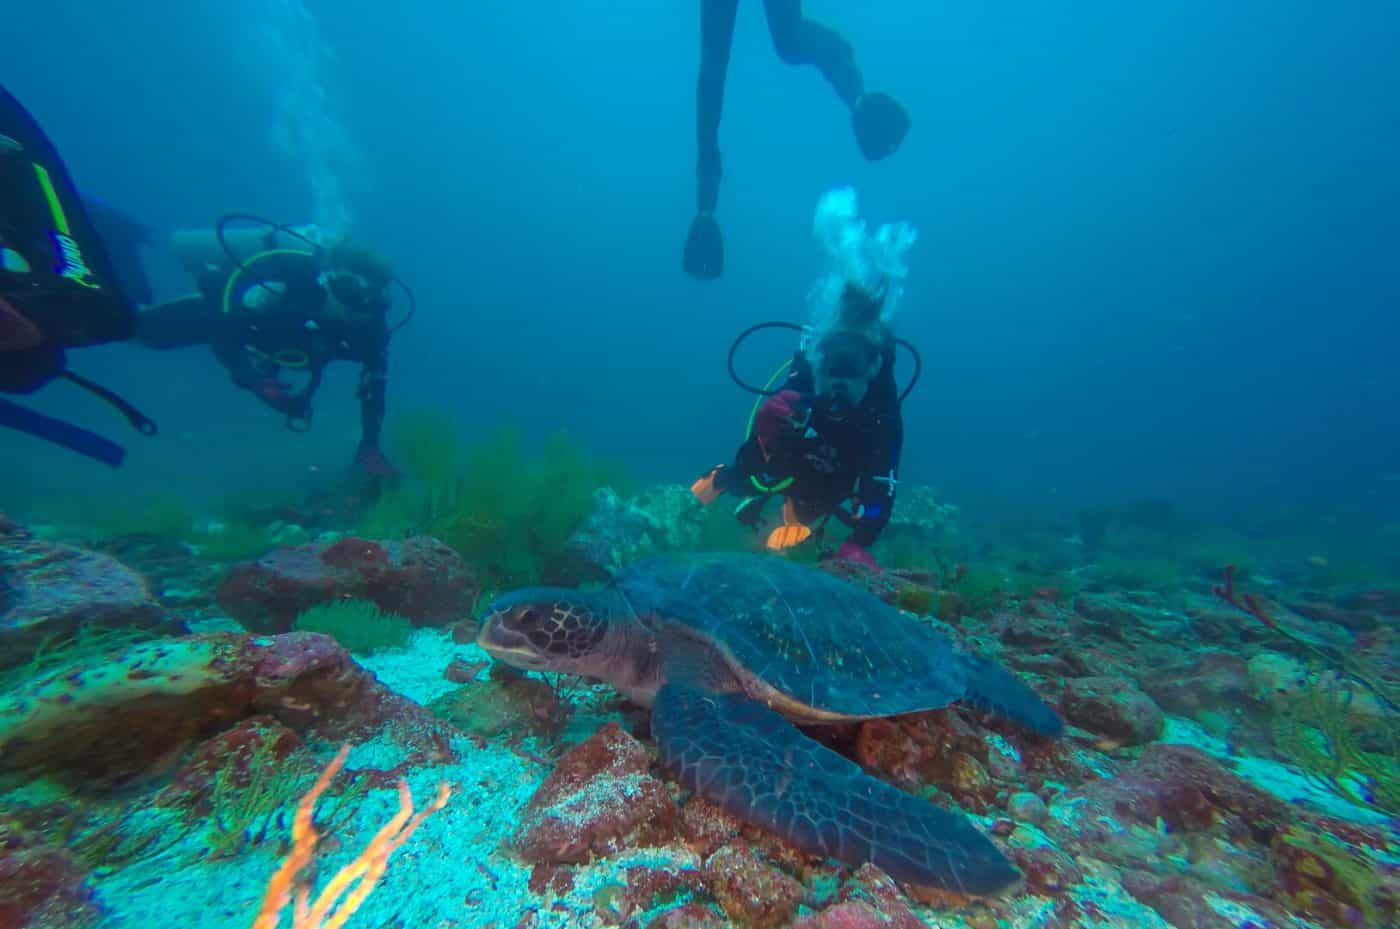 Lora diving with a sea turtle at Gordon Rocks, experiencing the incredible underwater world and marine biodiversity of the Galapagos.